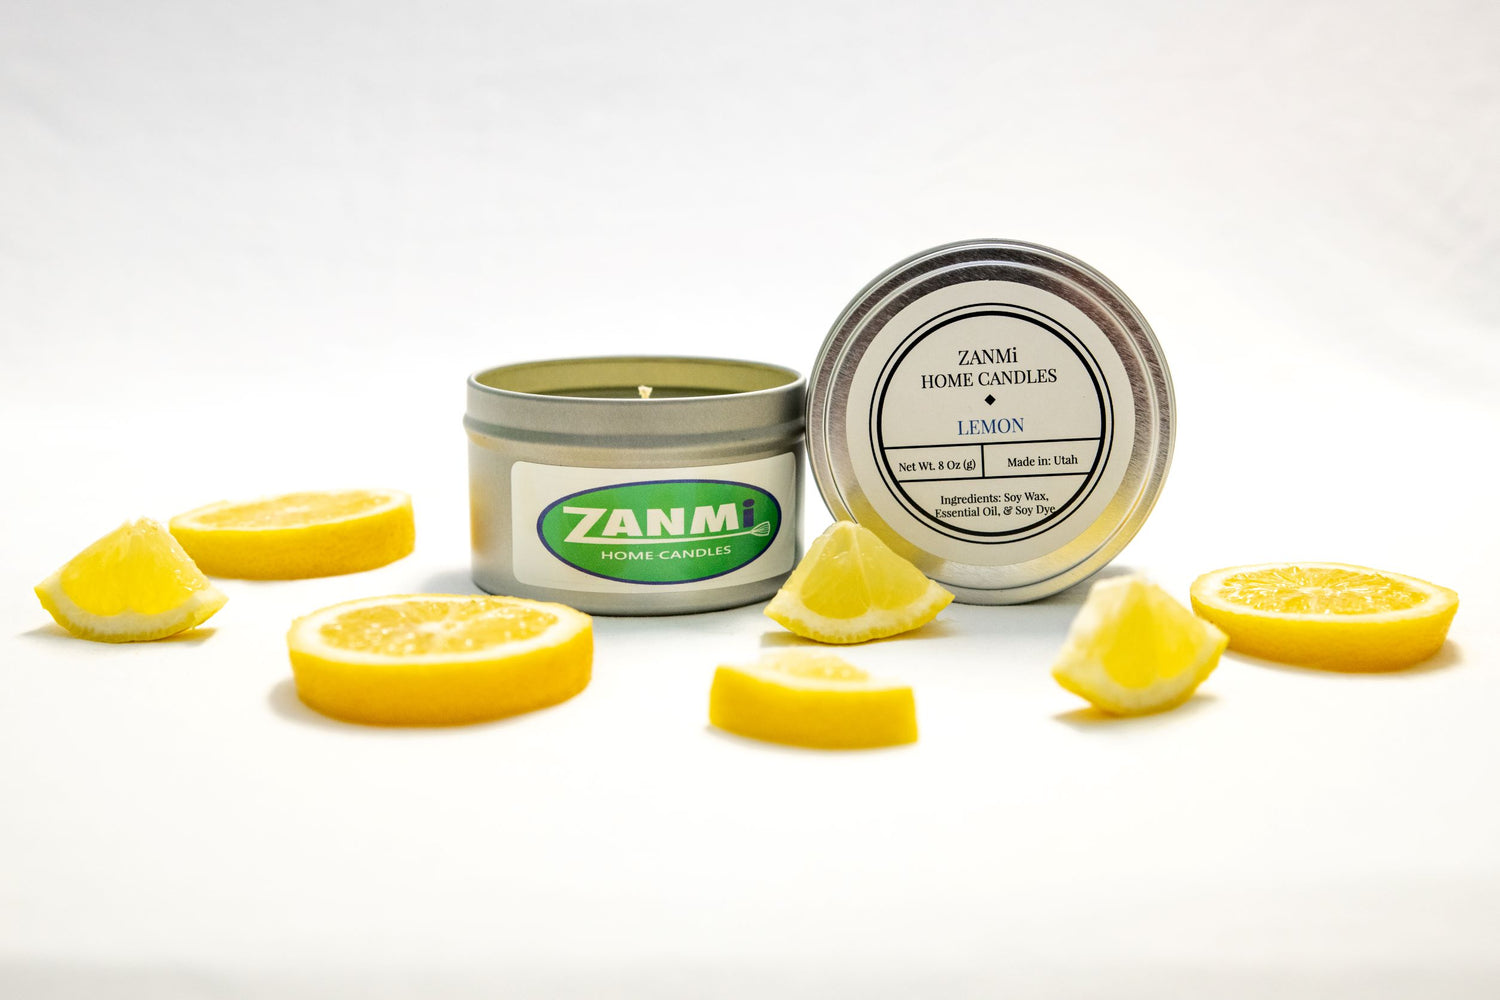 A lemon-scented soy wax candle on a white surface surrounded by lemon slices.